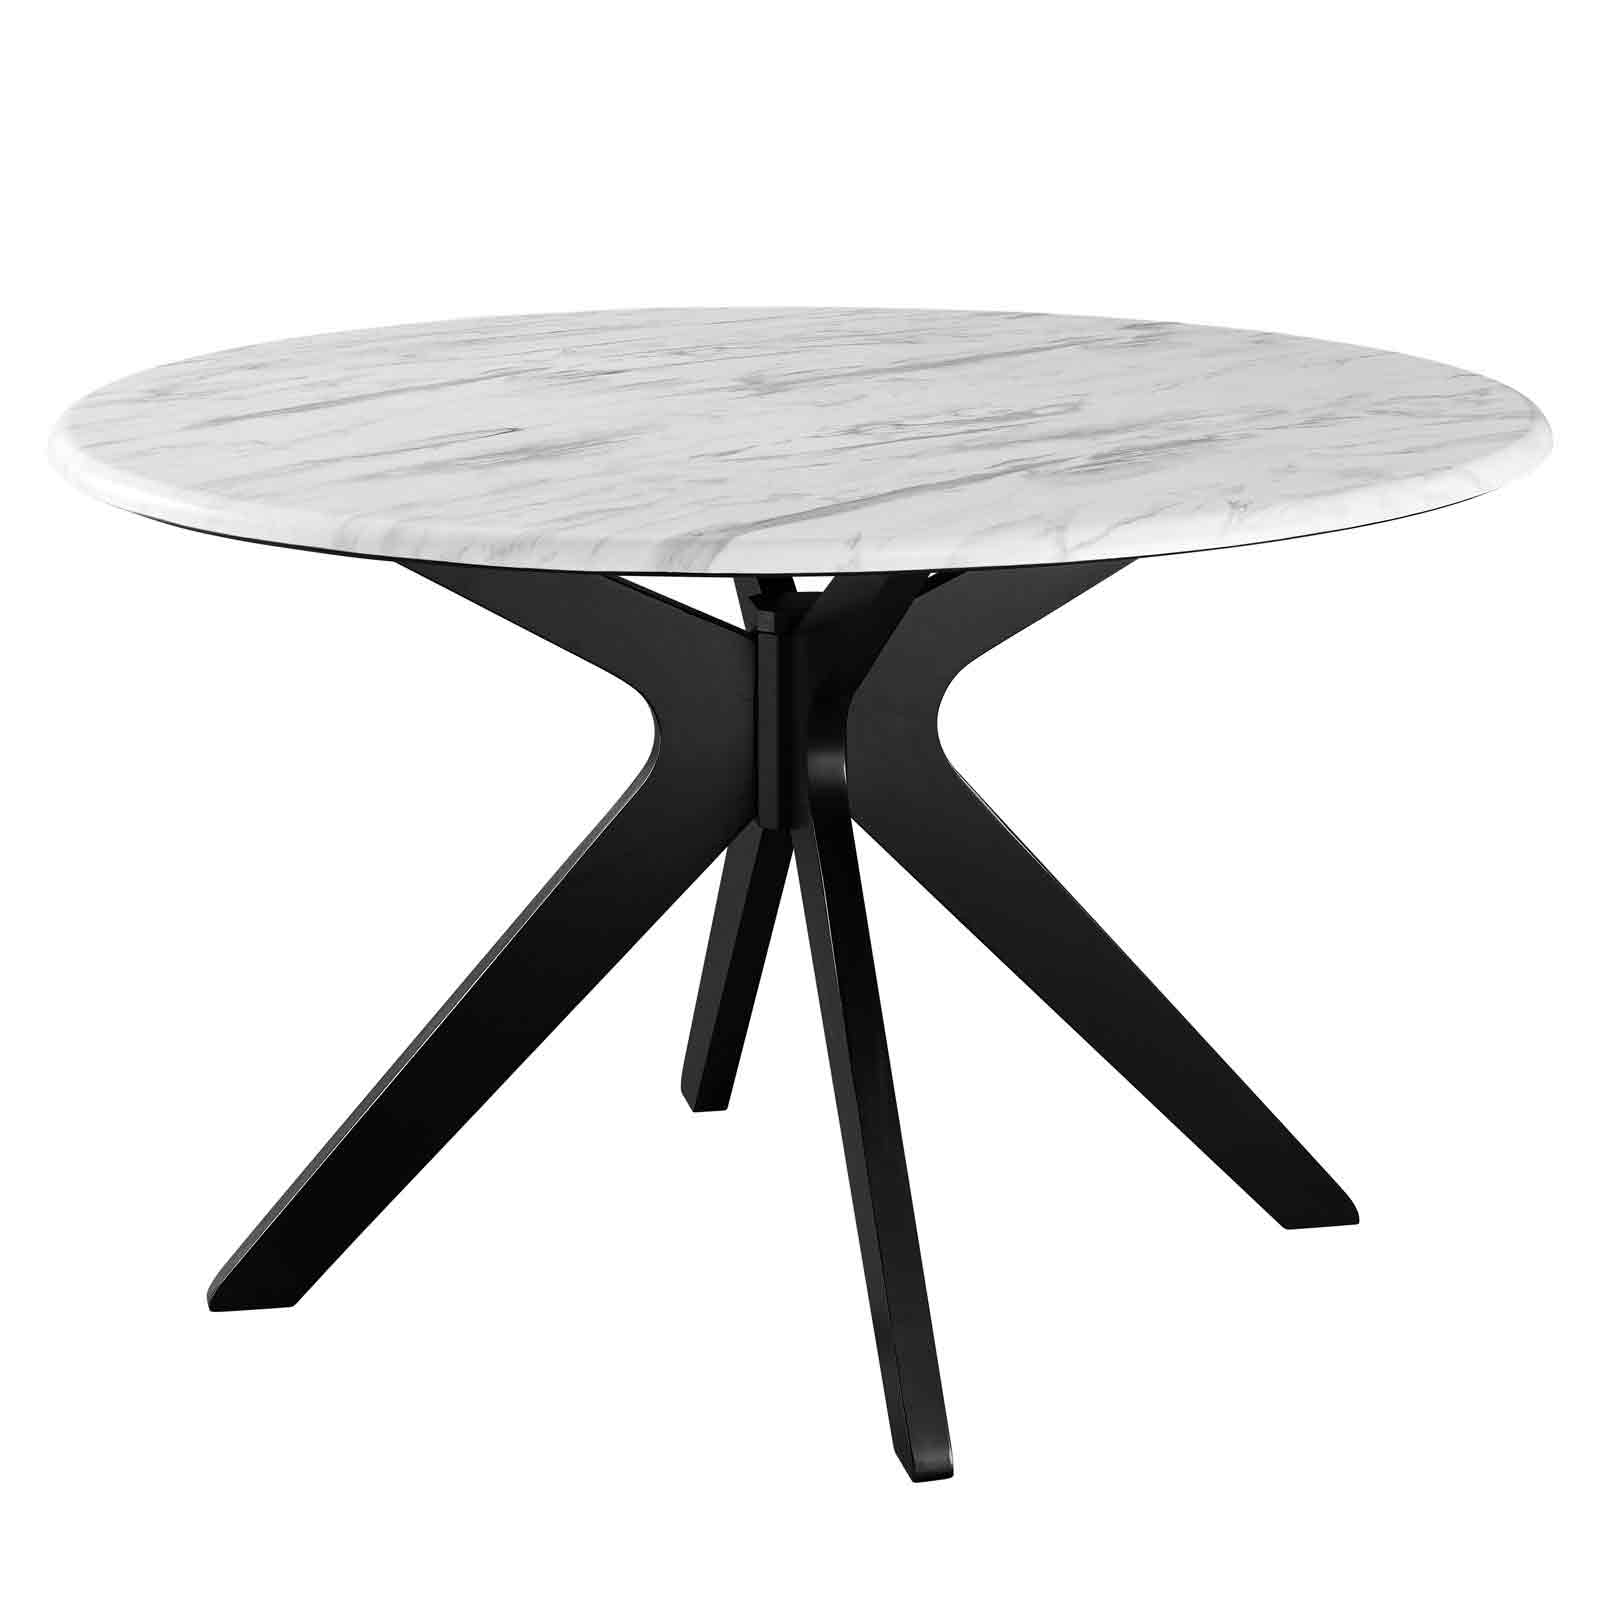 Traverse 50" Round Performance Artificial Marble Dining Table in Black White